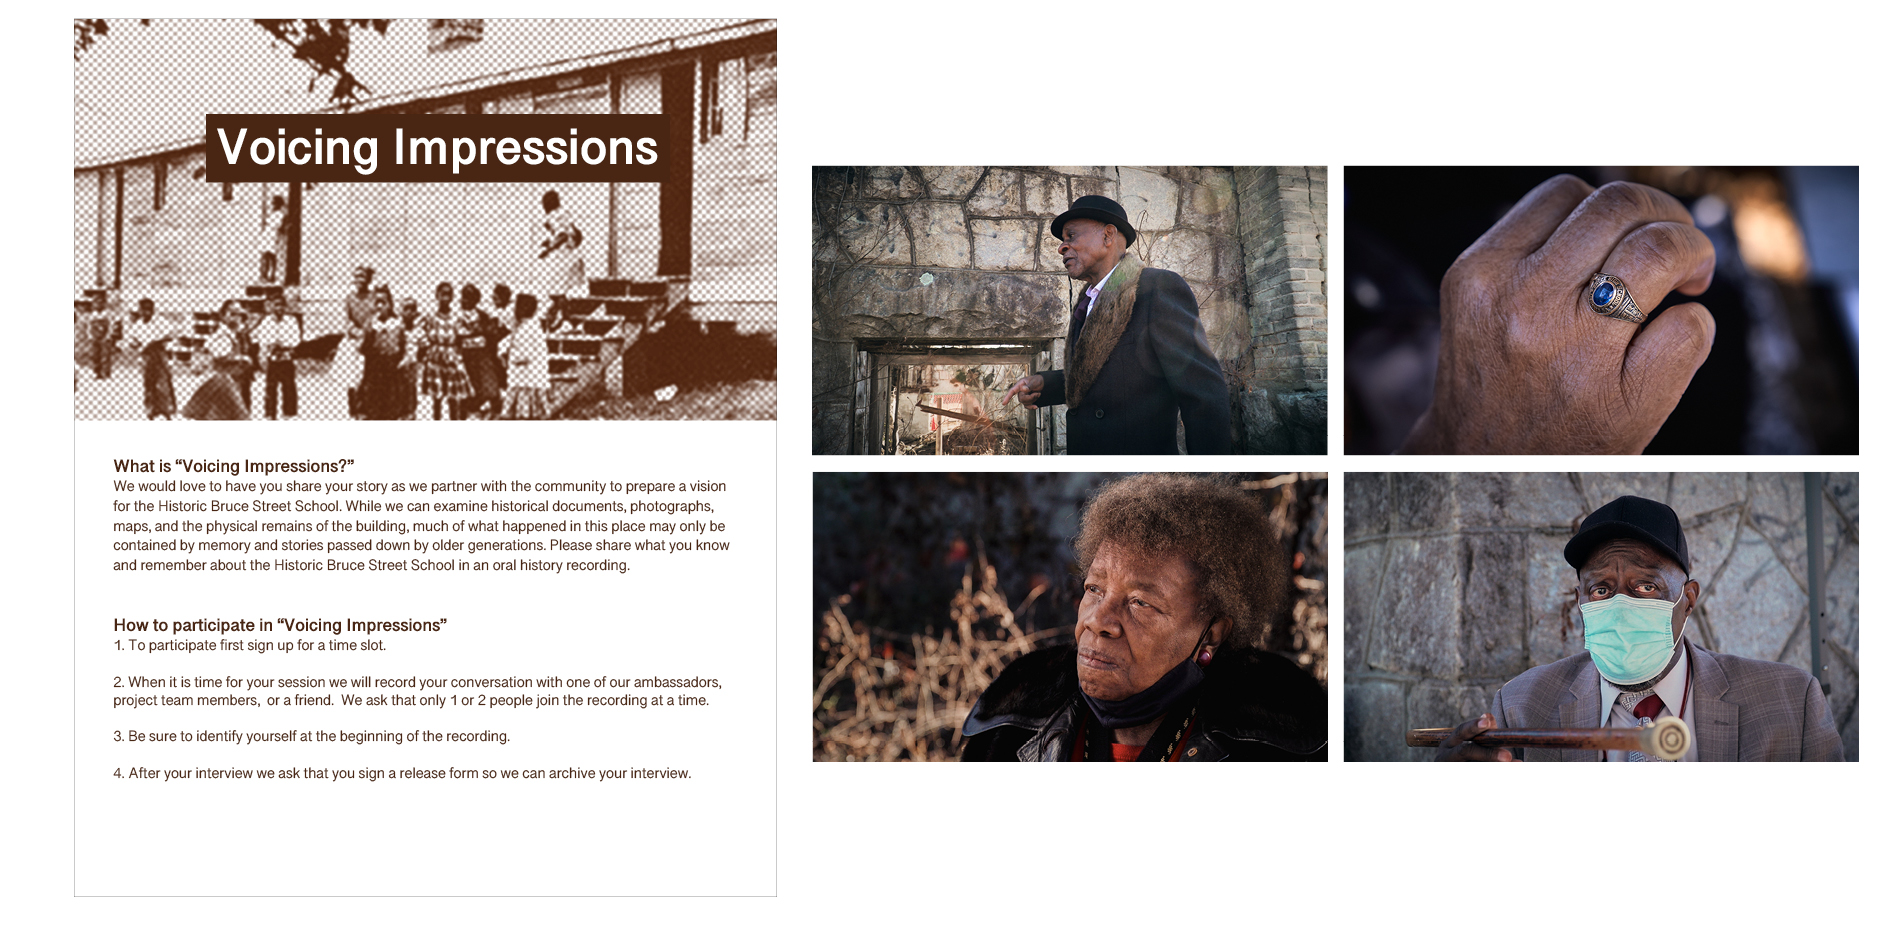 Collage of "Voicing Impressions" instruction board and oral histories stills